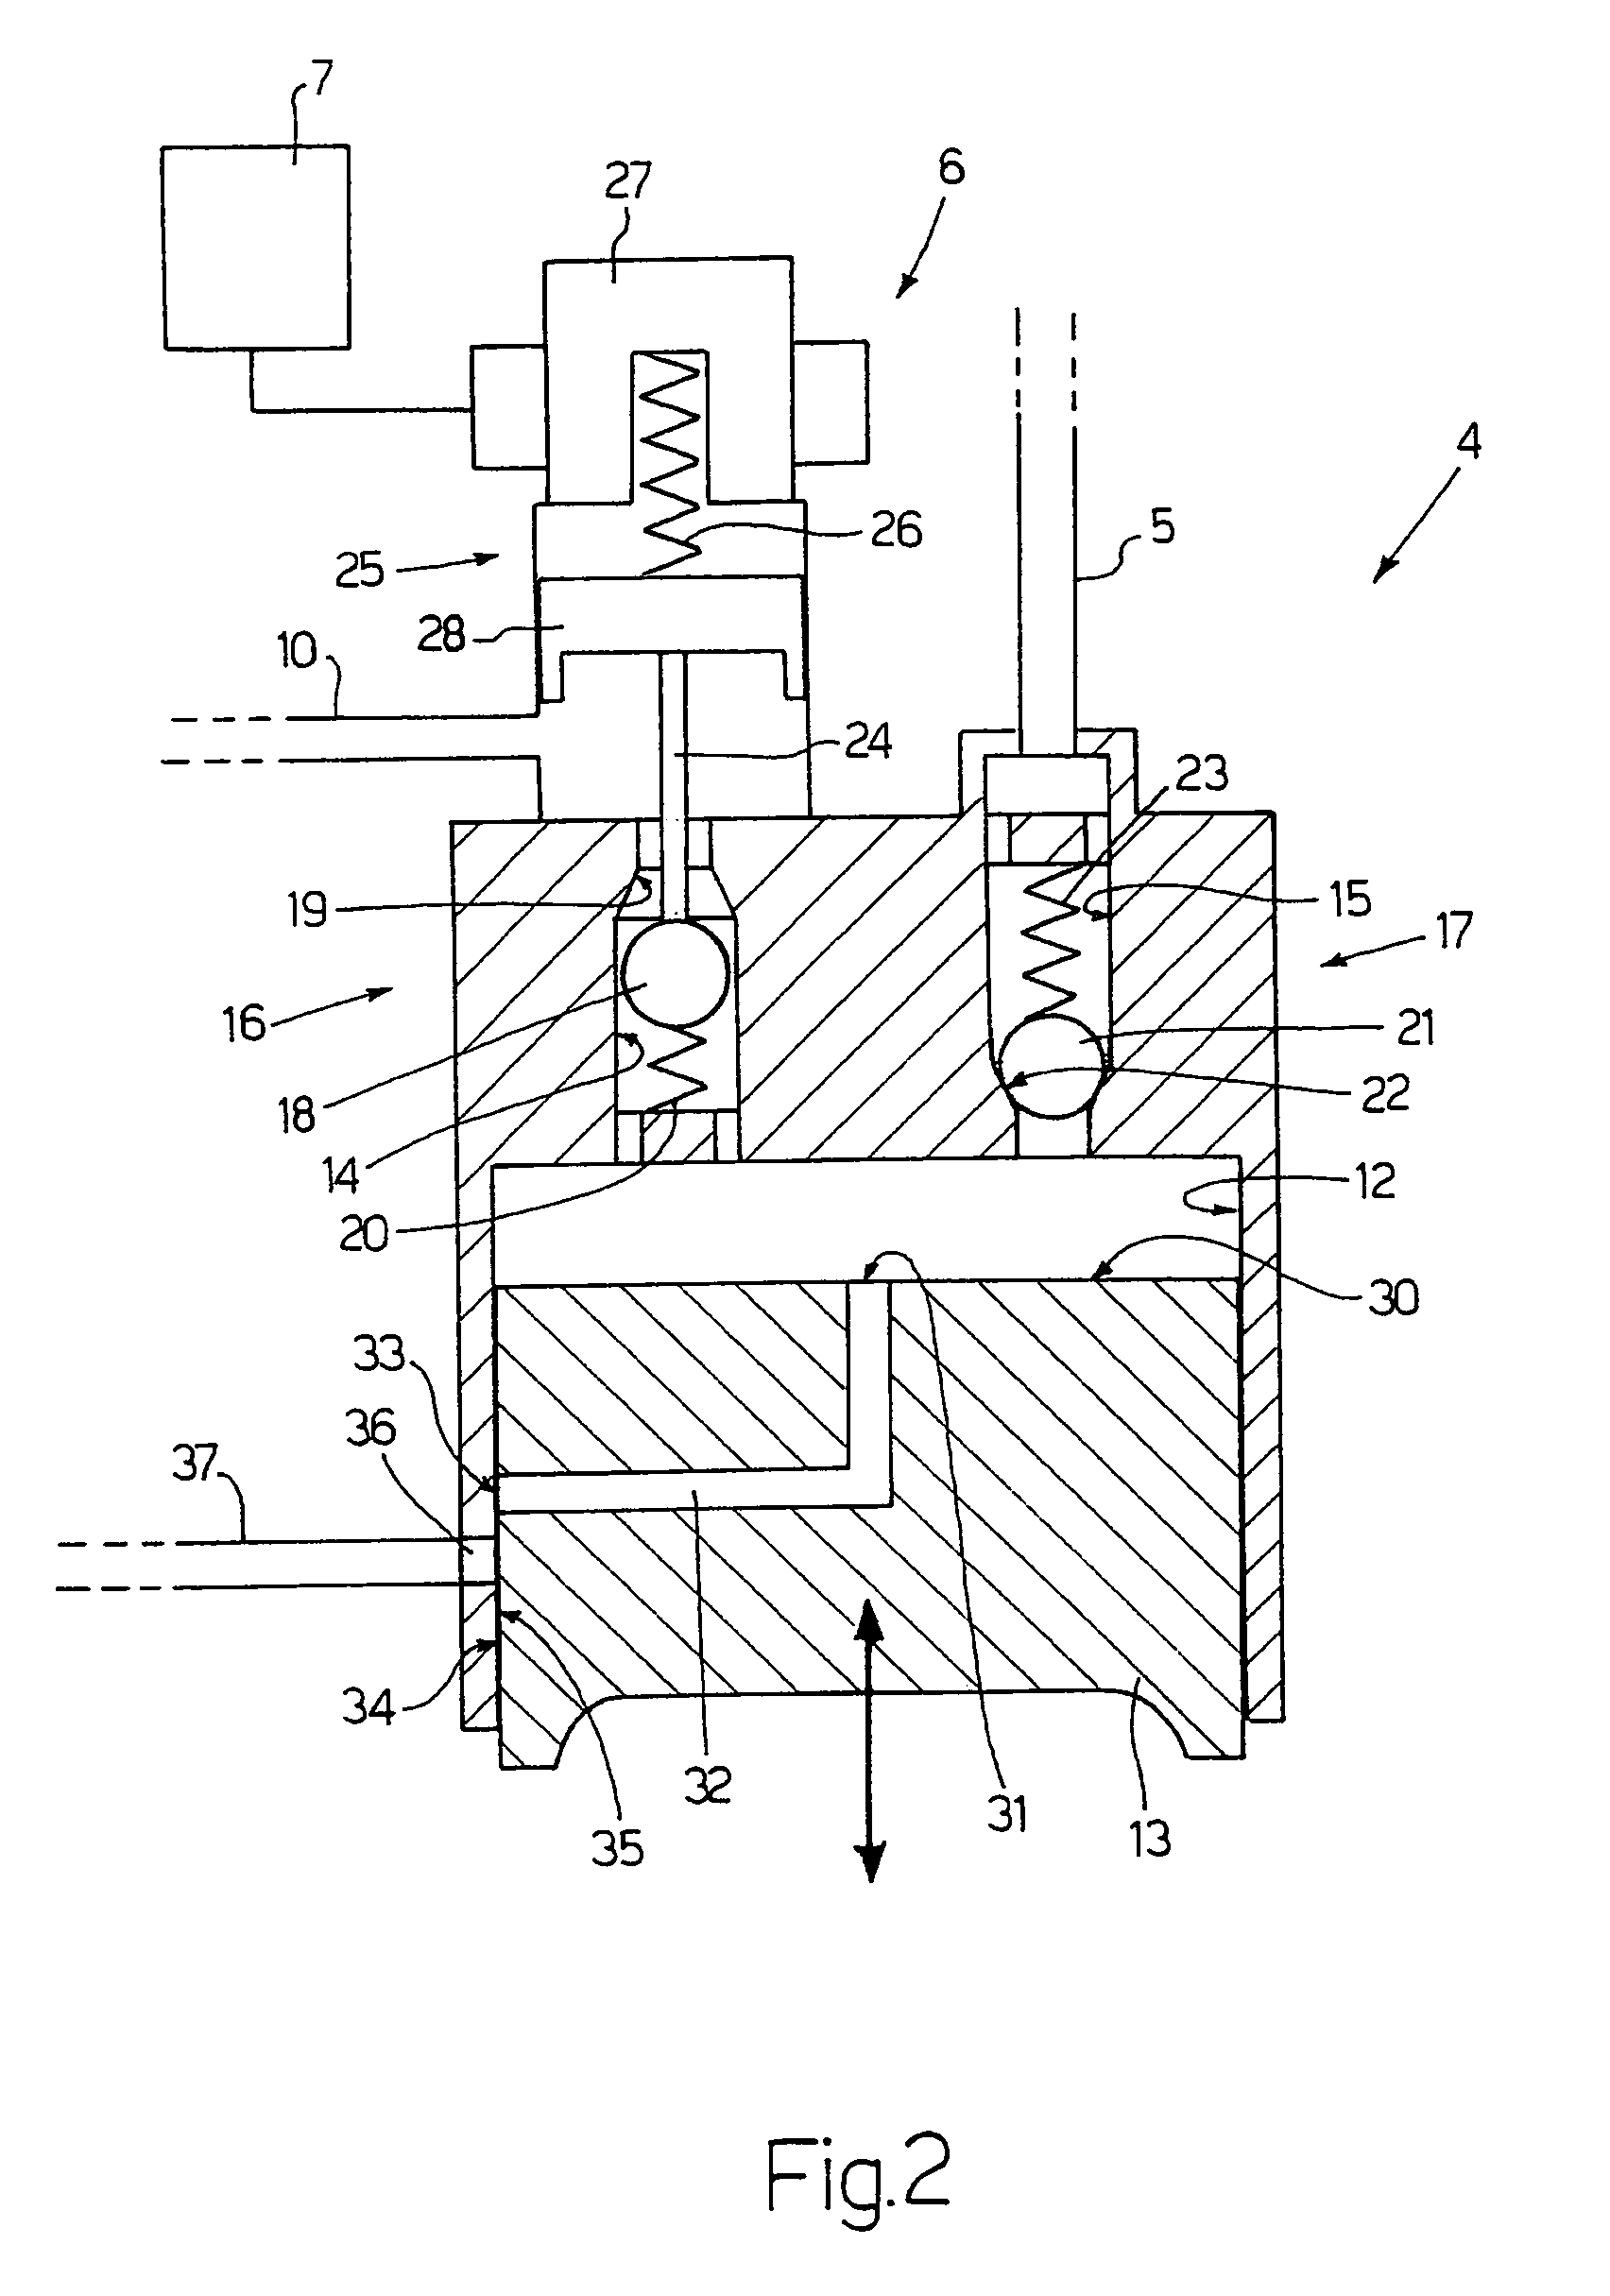 Method for the direct injection of fuel into an internal combustion engine